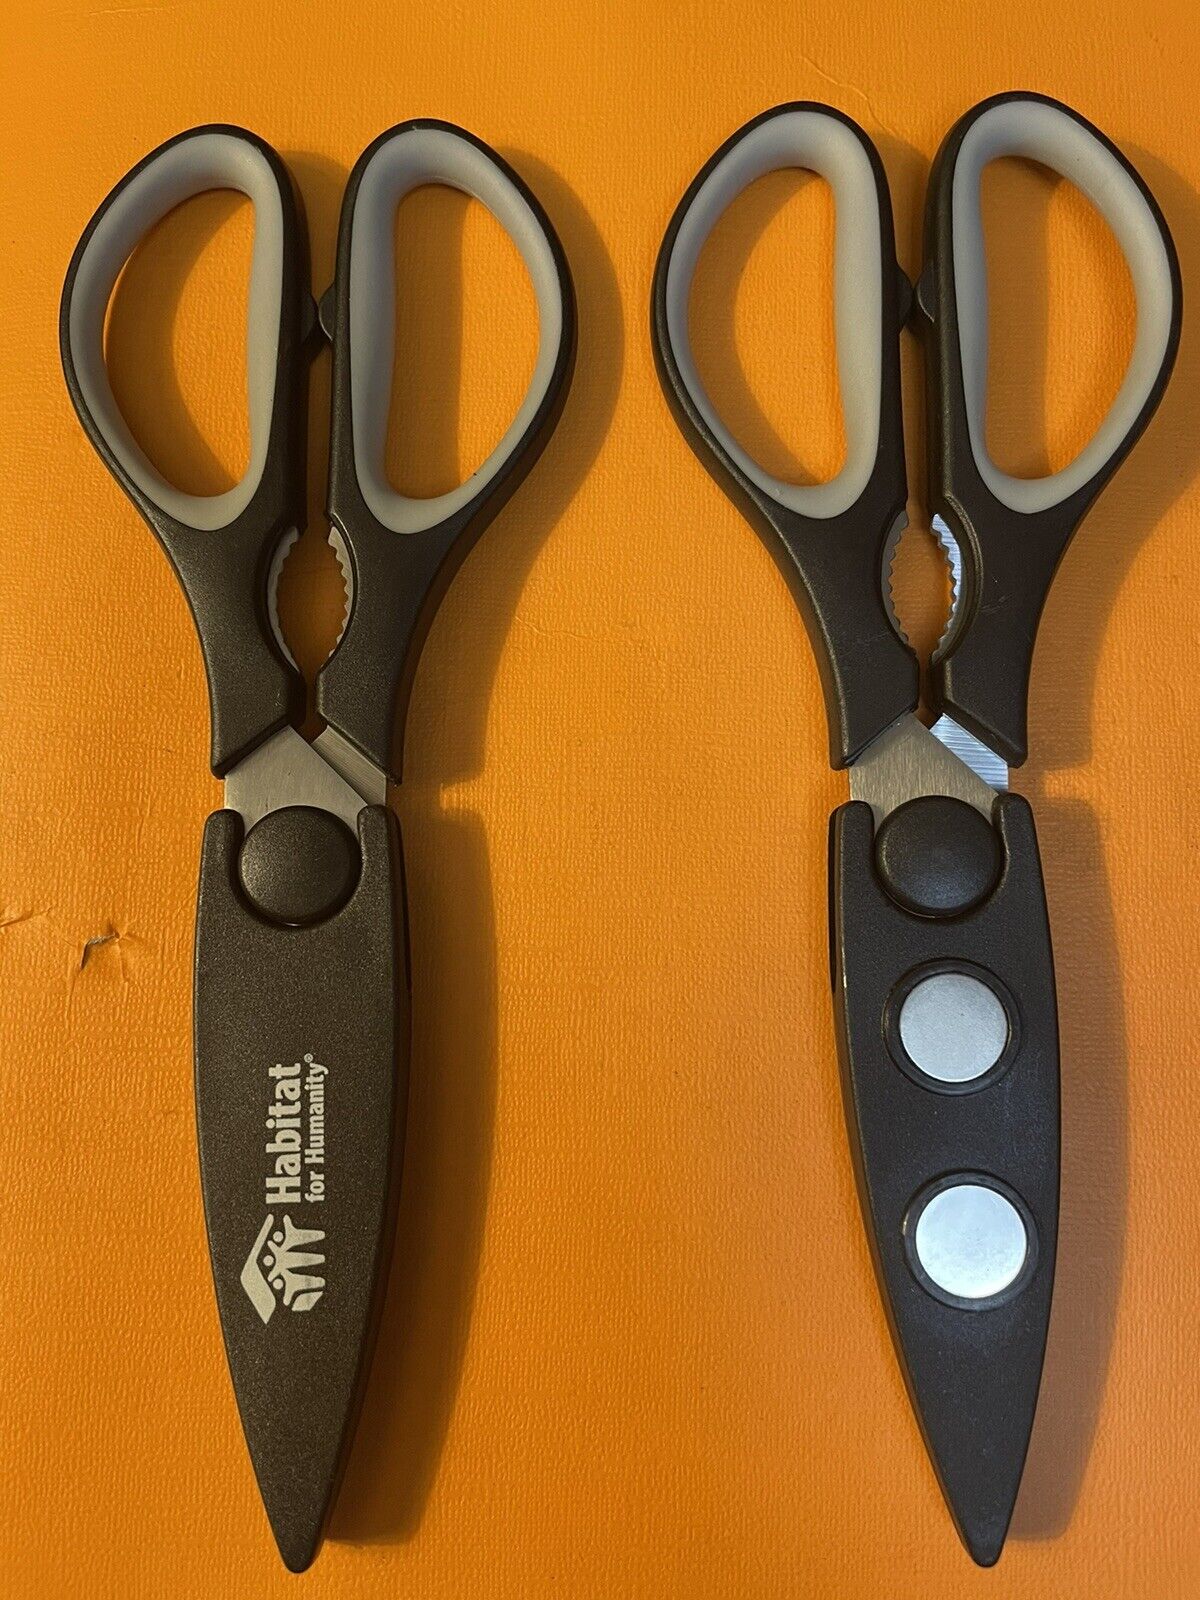 habiat for humanity scissors 8 Cheap super special price Max 48% OFF inch 2 Sets Quality Stainles High